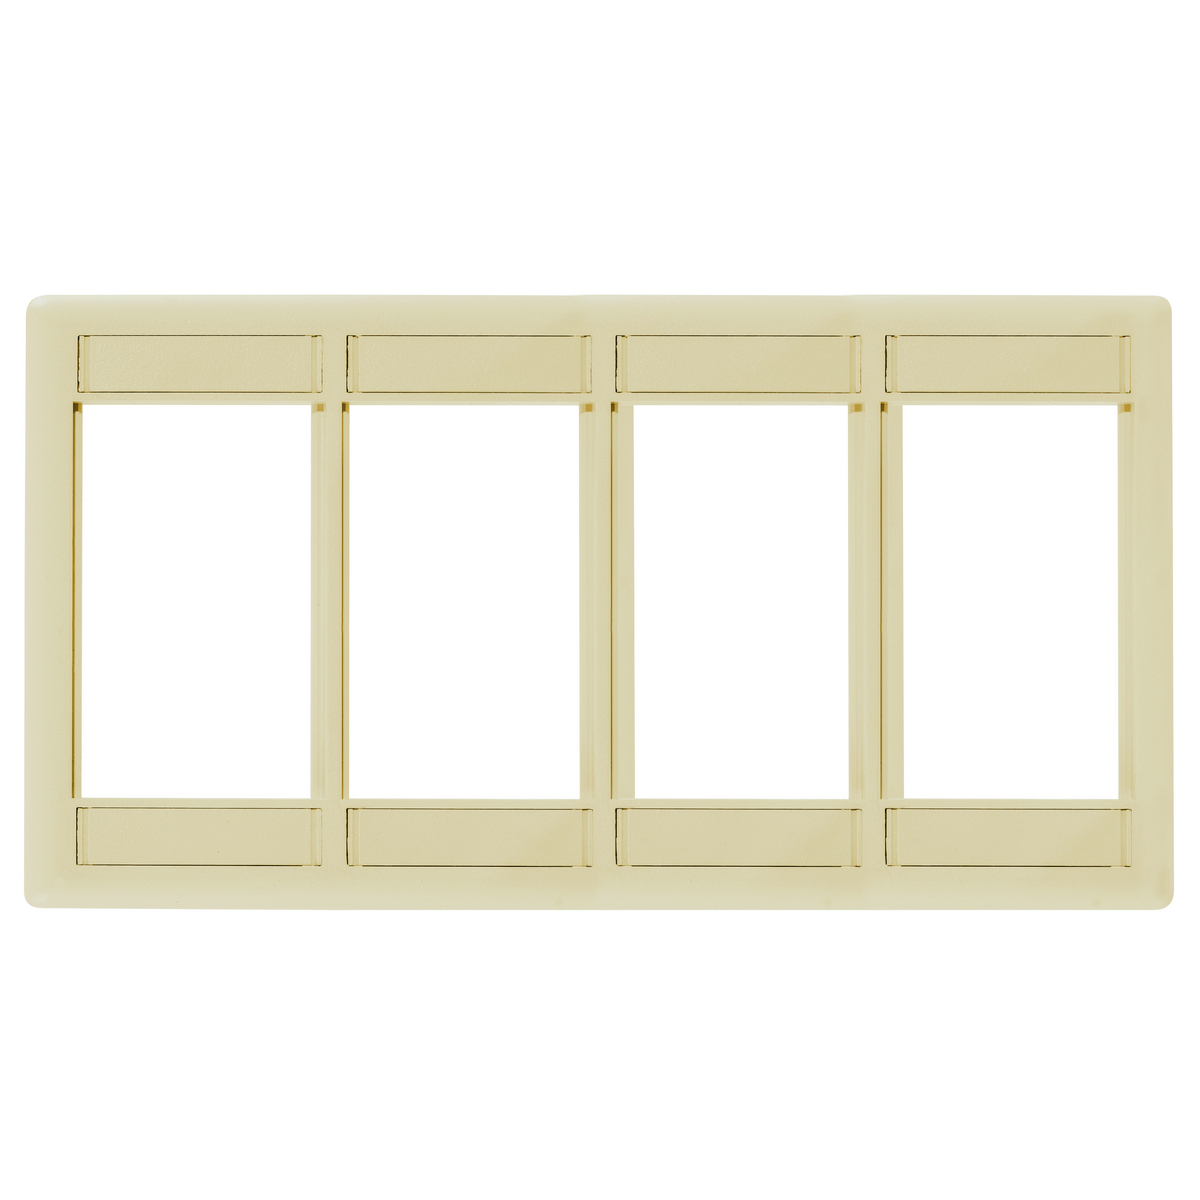 Plate, Istation Module Frame, 4 Unit,Electrical Ivory